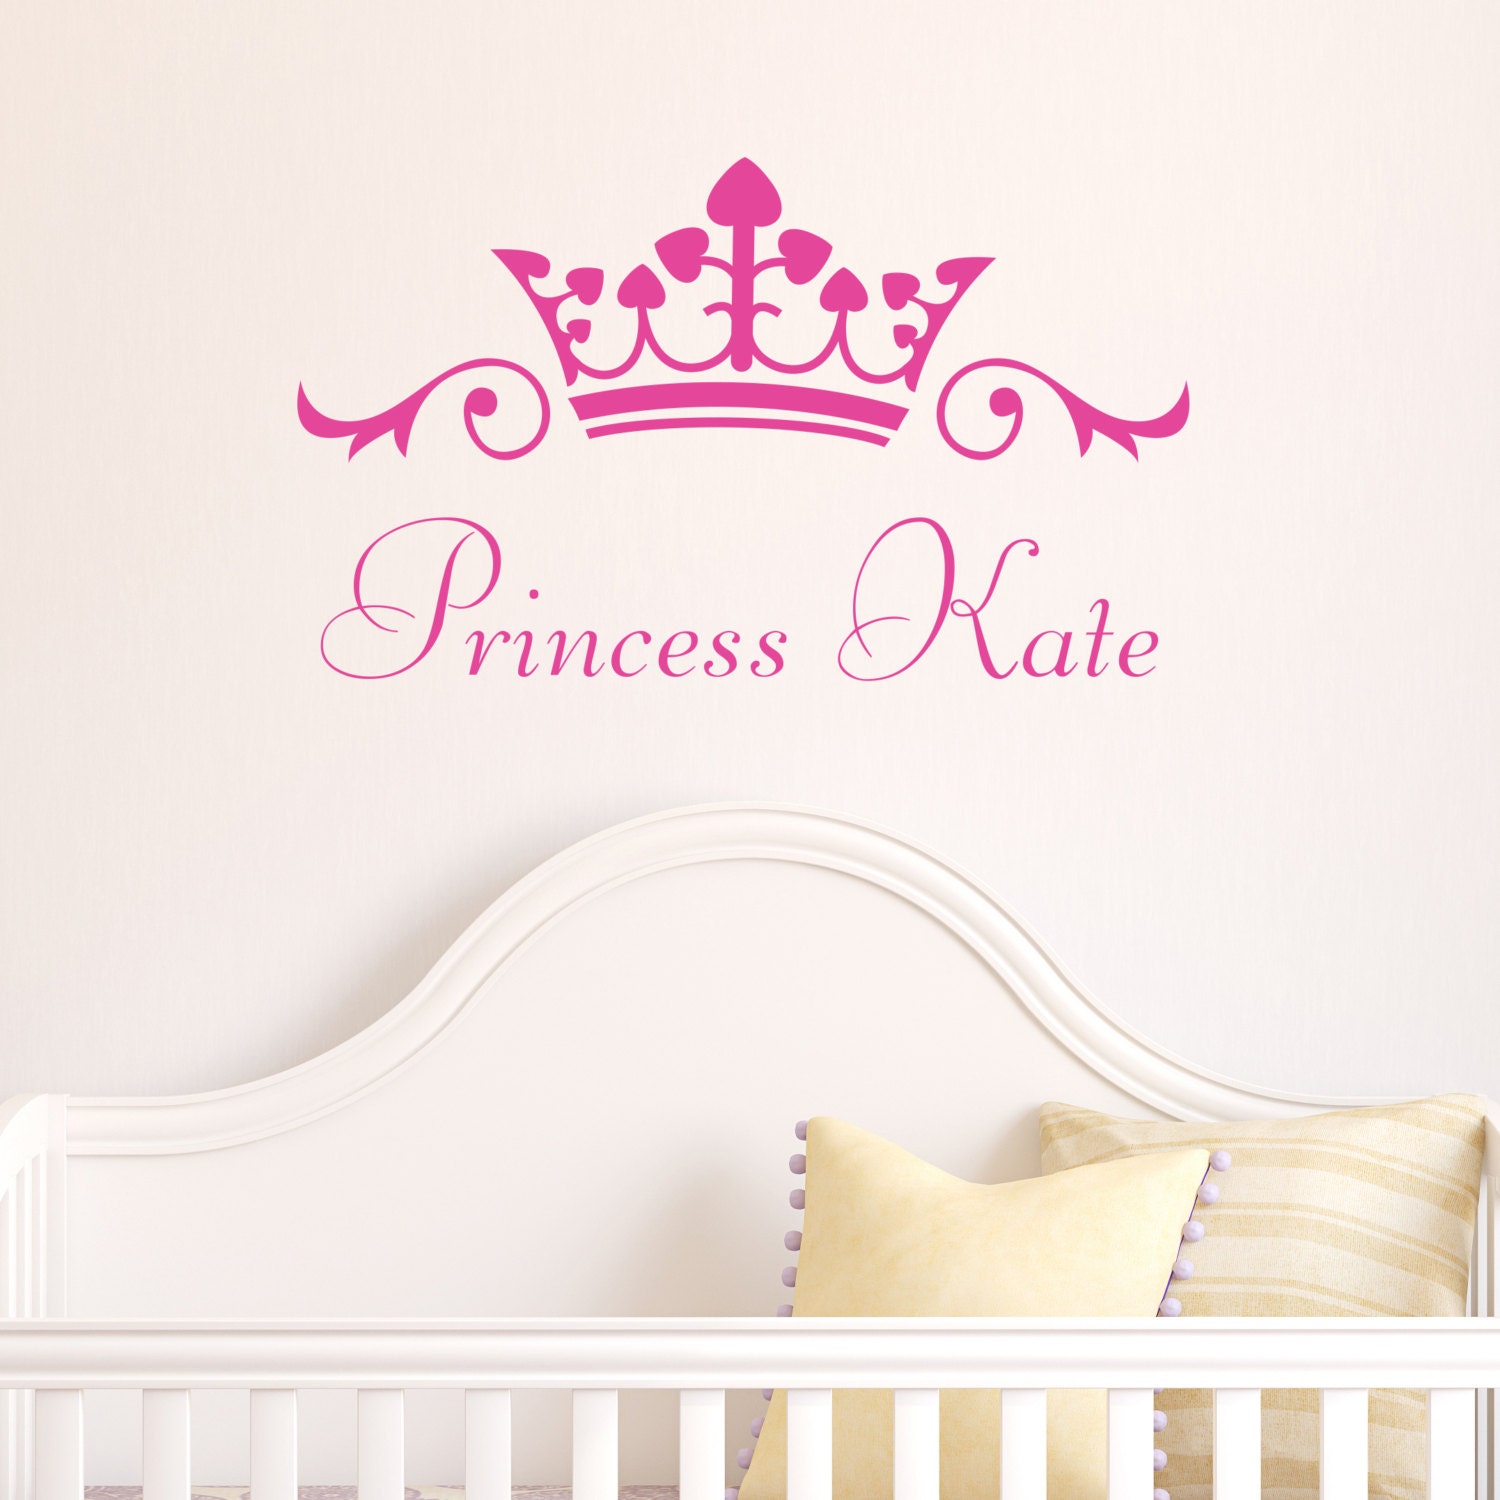 Personalised Girl Children Nursery Bedroom Name Wall Sticker Wall Decal Princess